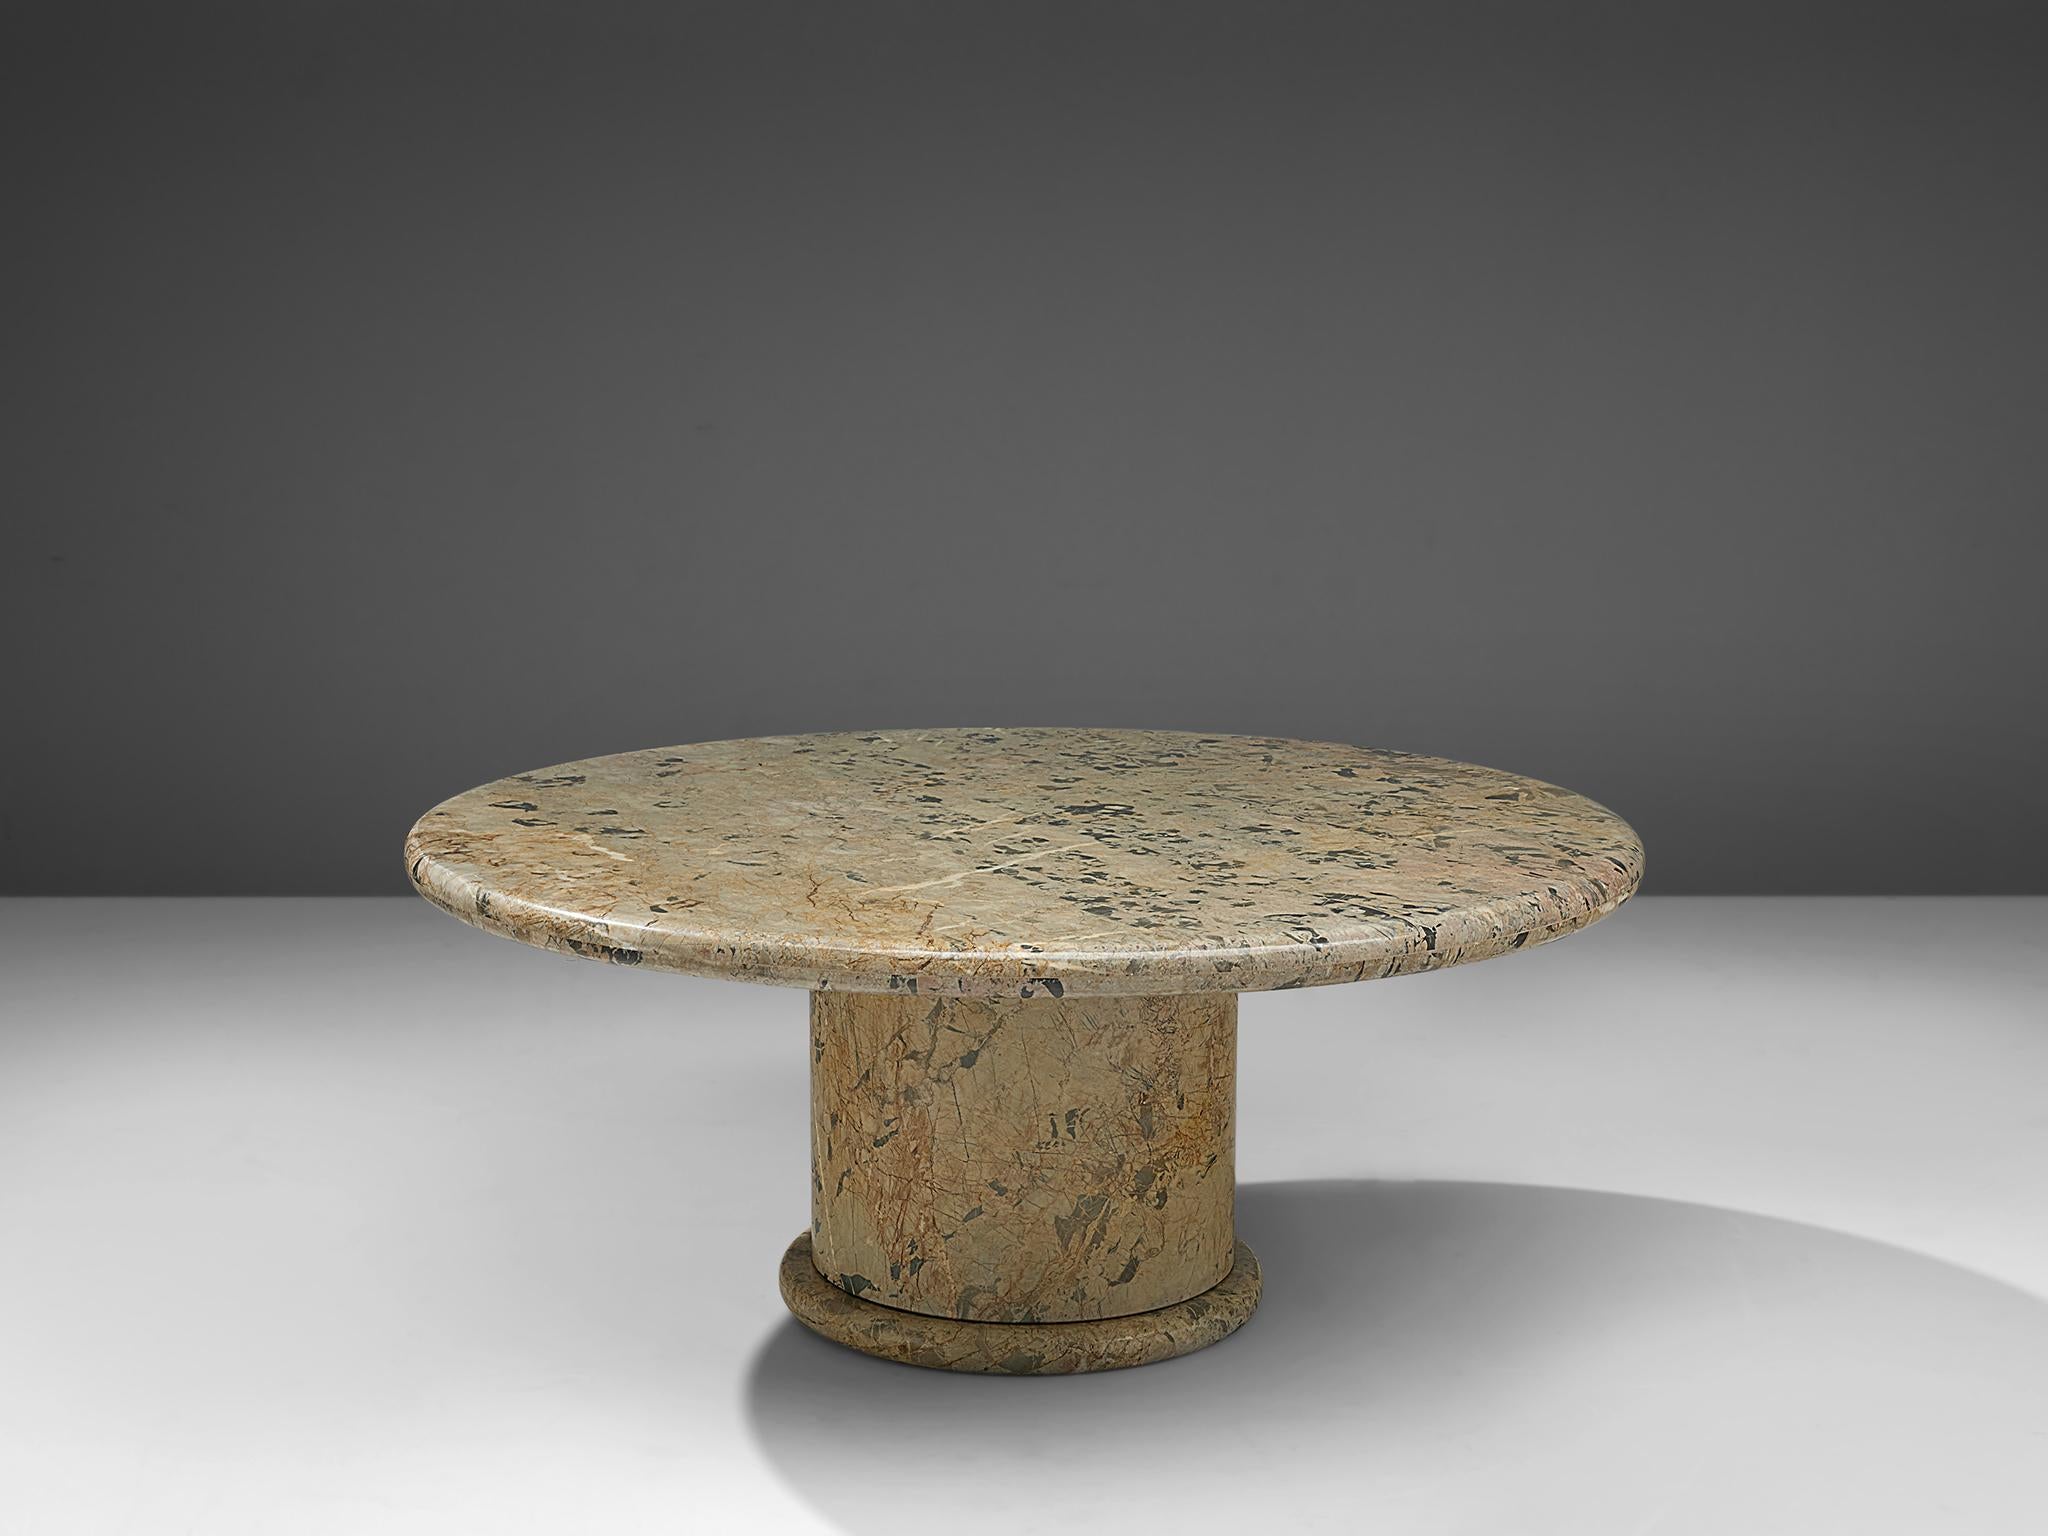 Round coffee table, colored marble, Italy, 1970s

This archetypical center table is a skillful example of Postmodern design. The table is executed in colorful marble. The round table features no joints or clamps and is architectural in its